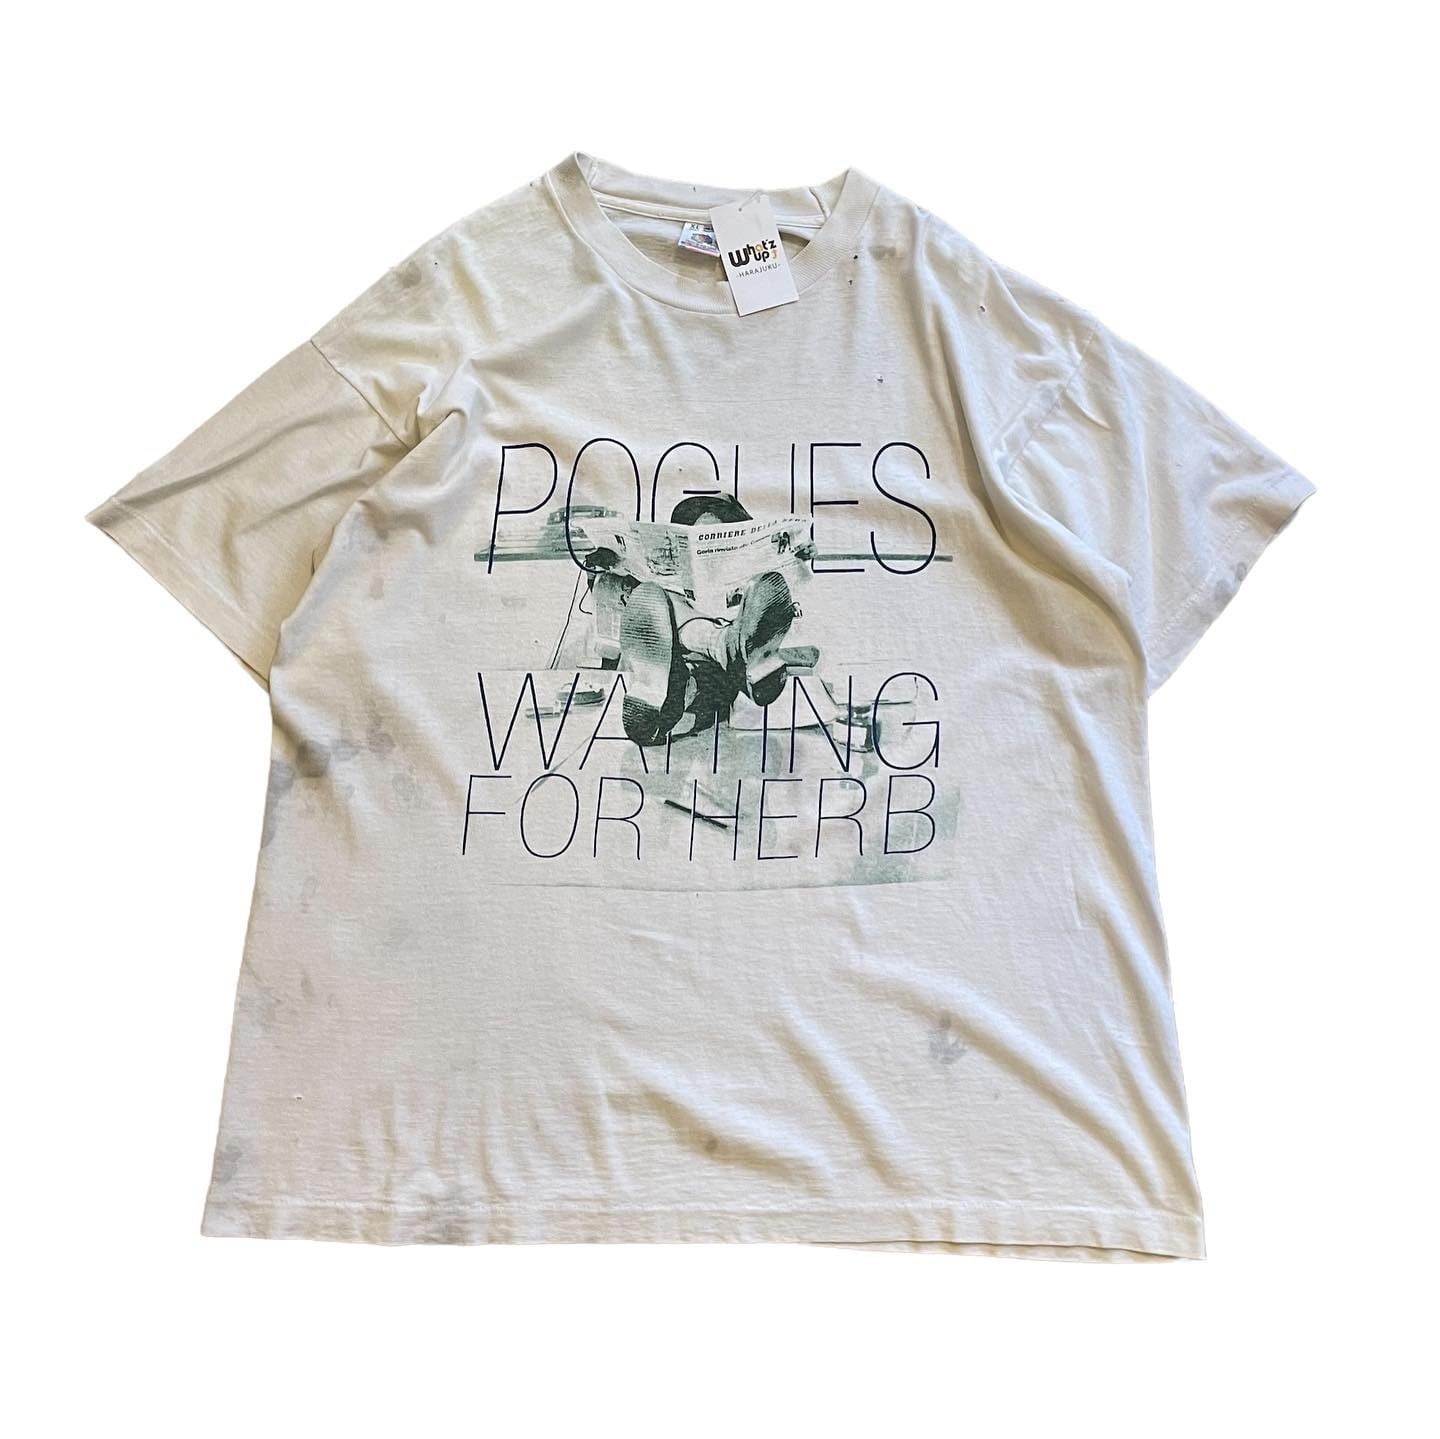 90s The Pogues “WAITING FOR HERB” t-shirt | What'z up